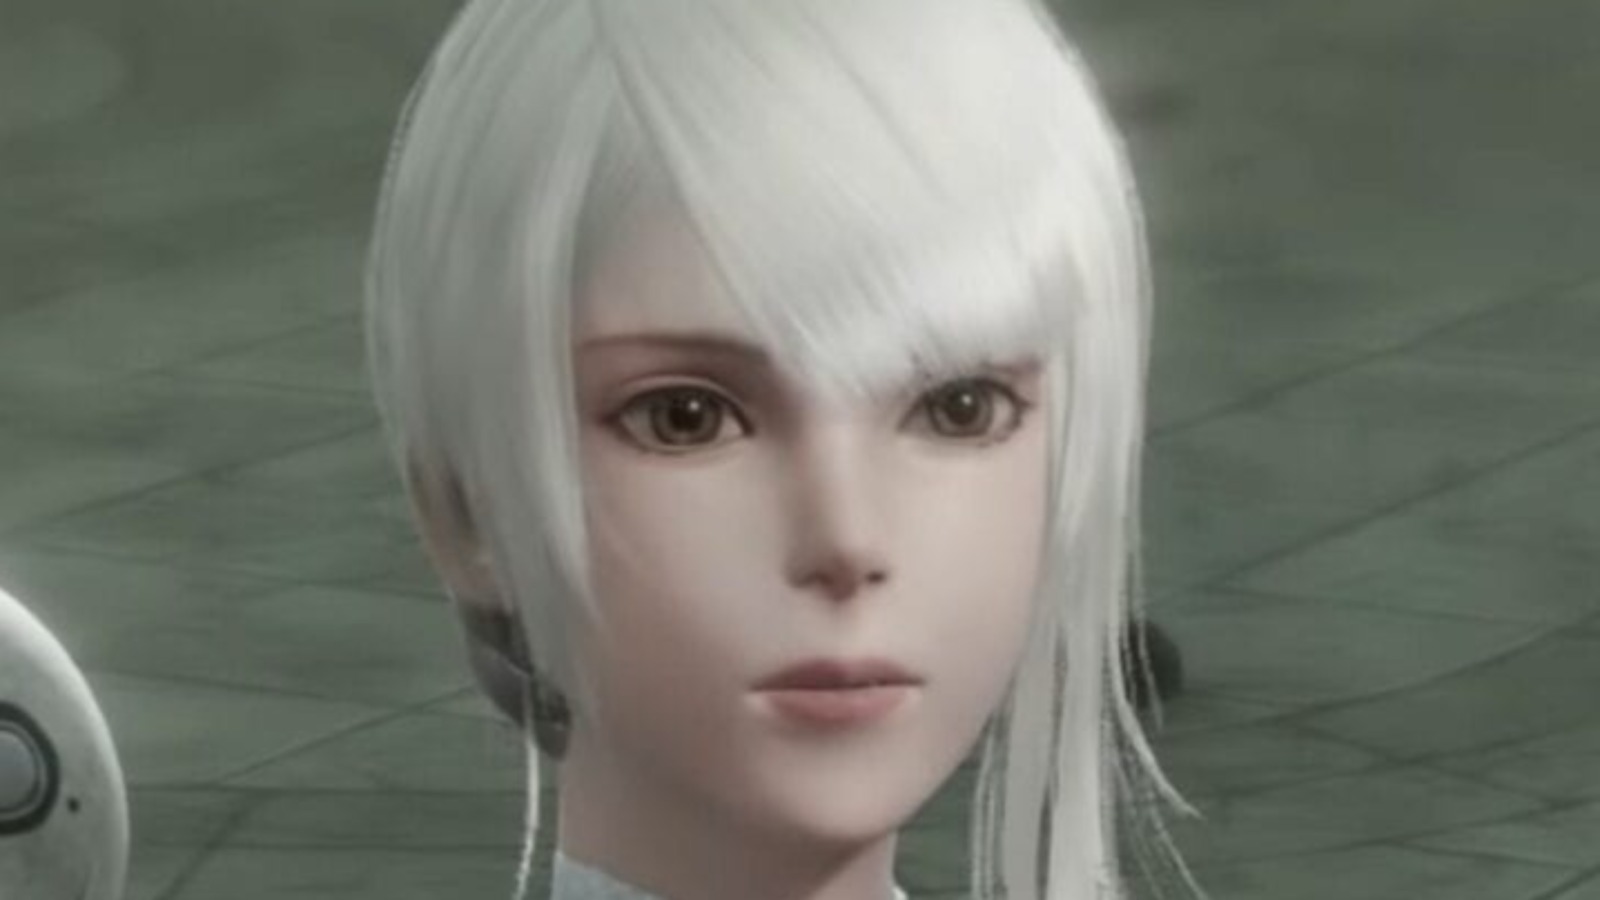 Where Does NieR Replicant Ver.1.22474487139... Fit In The NieR Timeline?